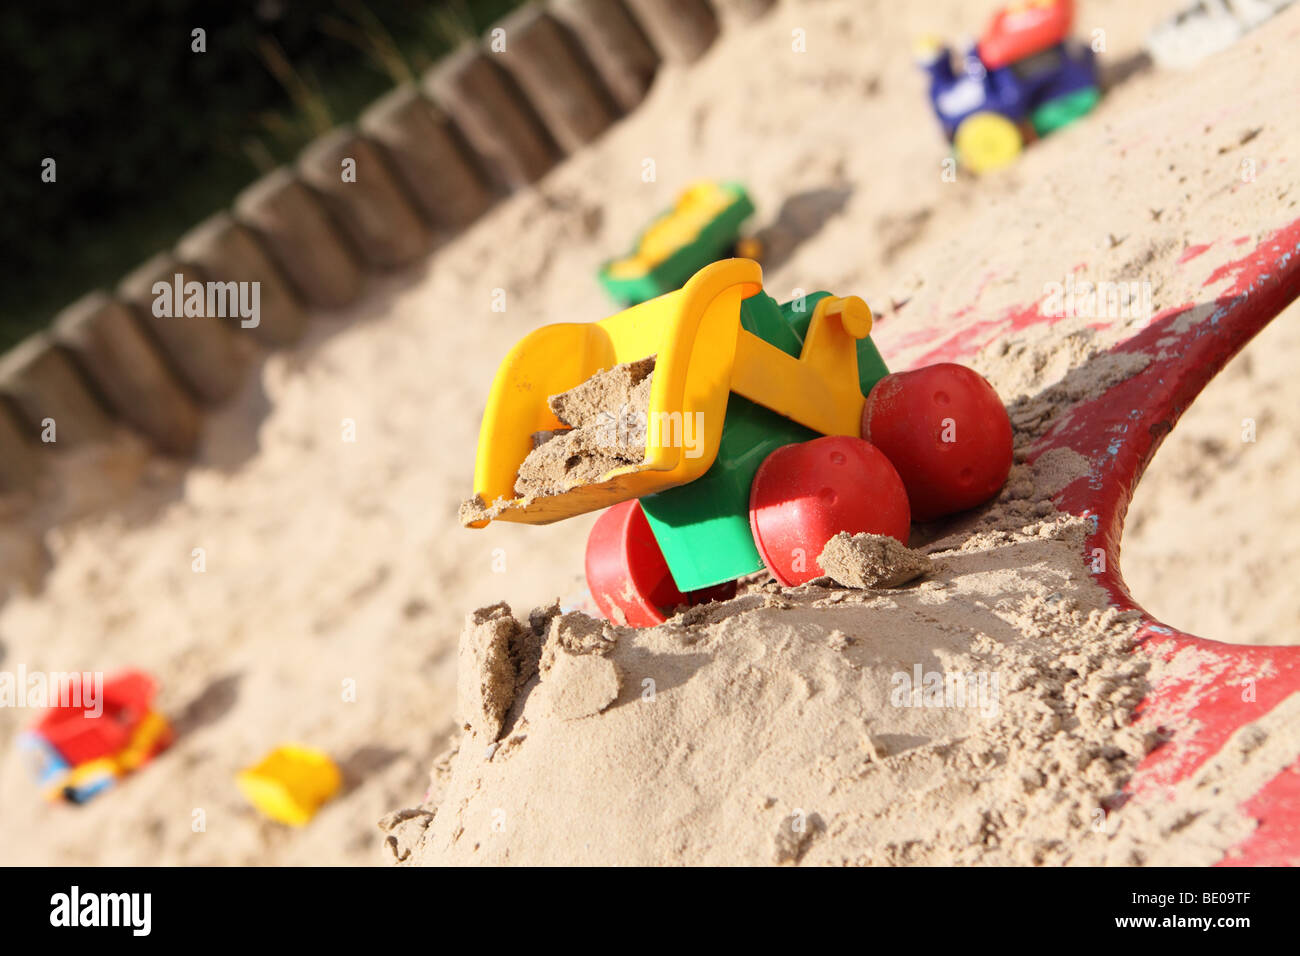 Childrens toys in a sand pit play area Stock Photo